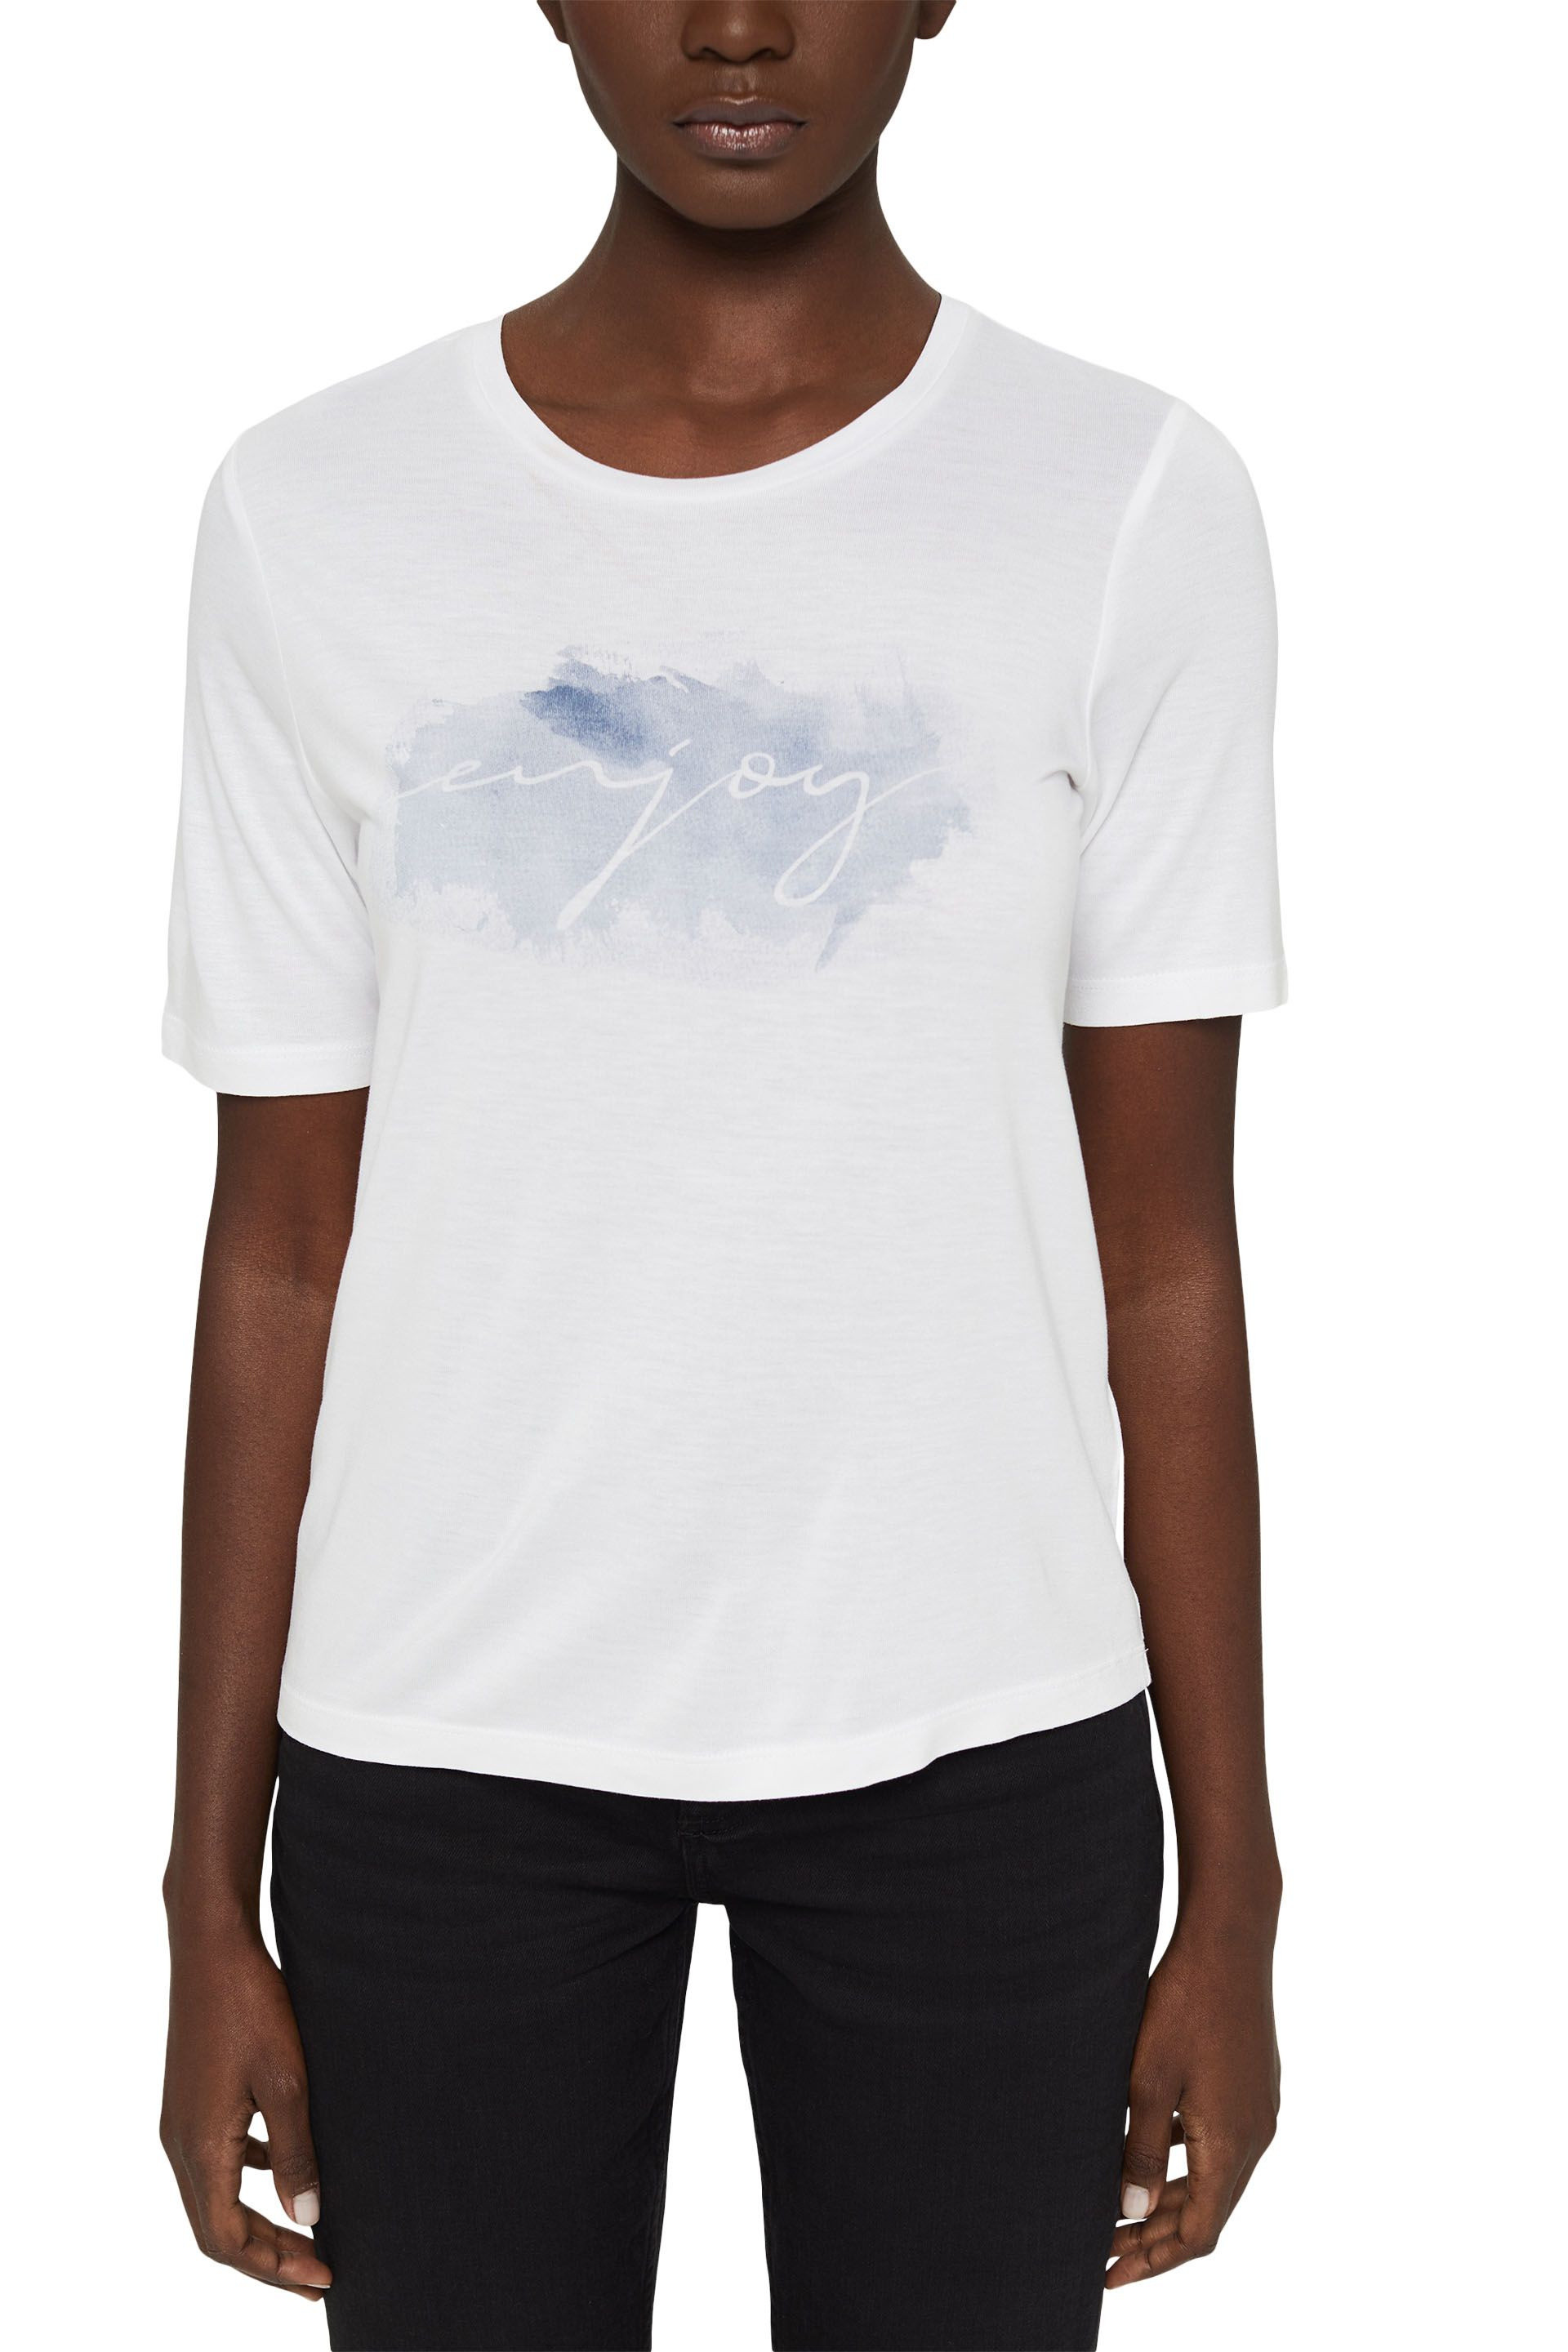 T-shirt with printed writing, White, large image number 1